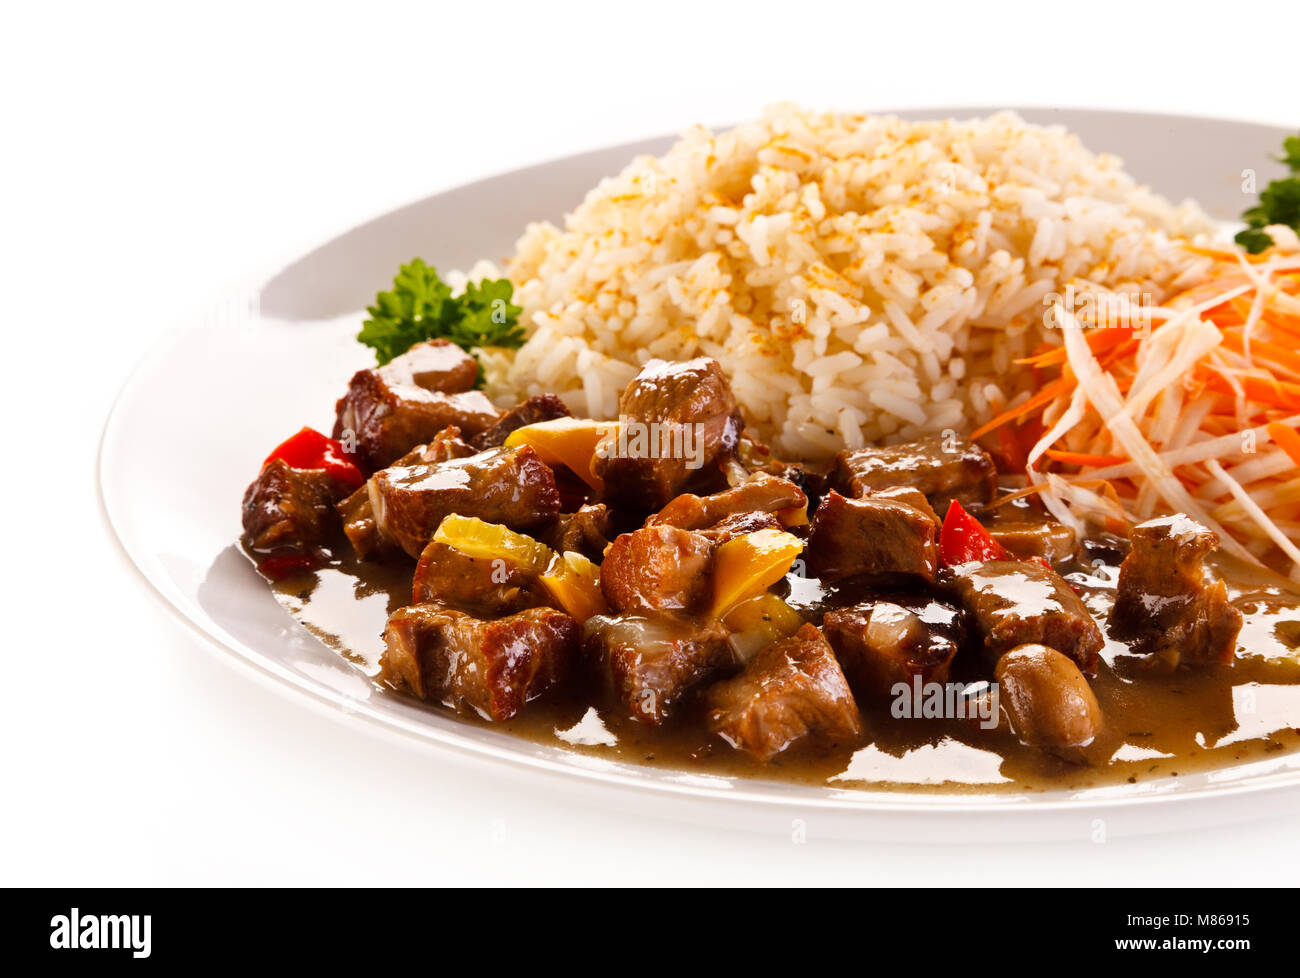 Roasted meat, white rice and vegetables Stock Photo